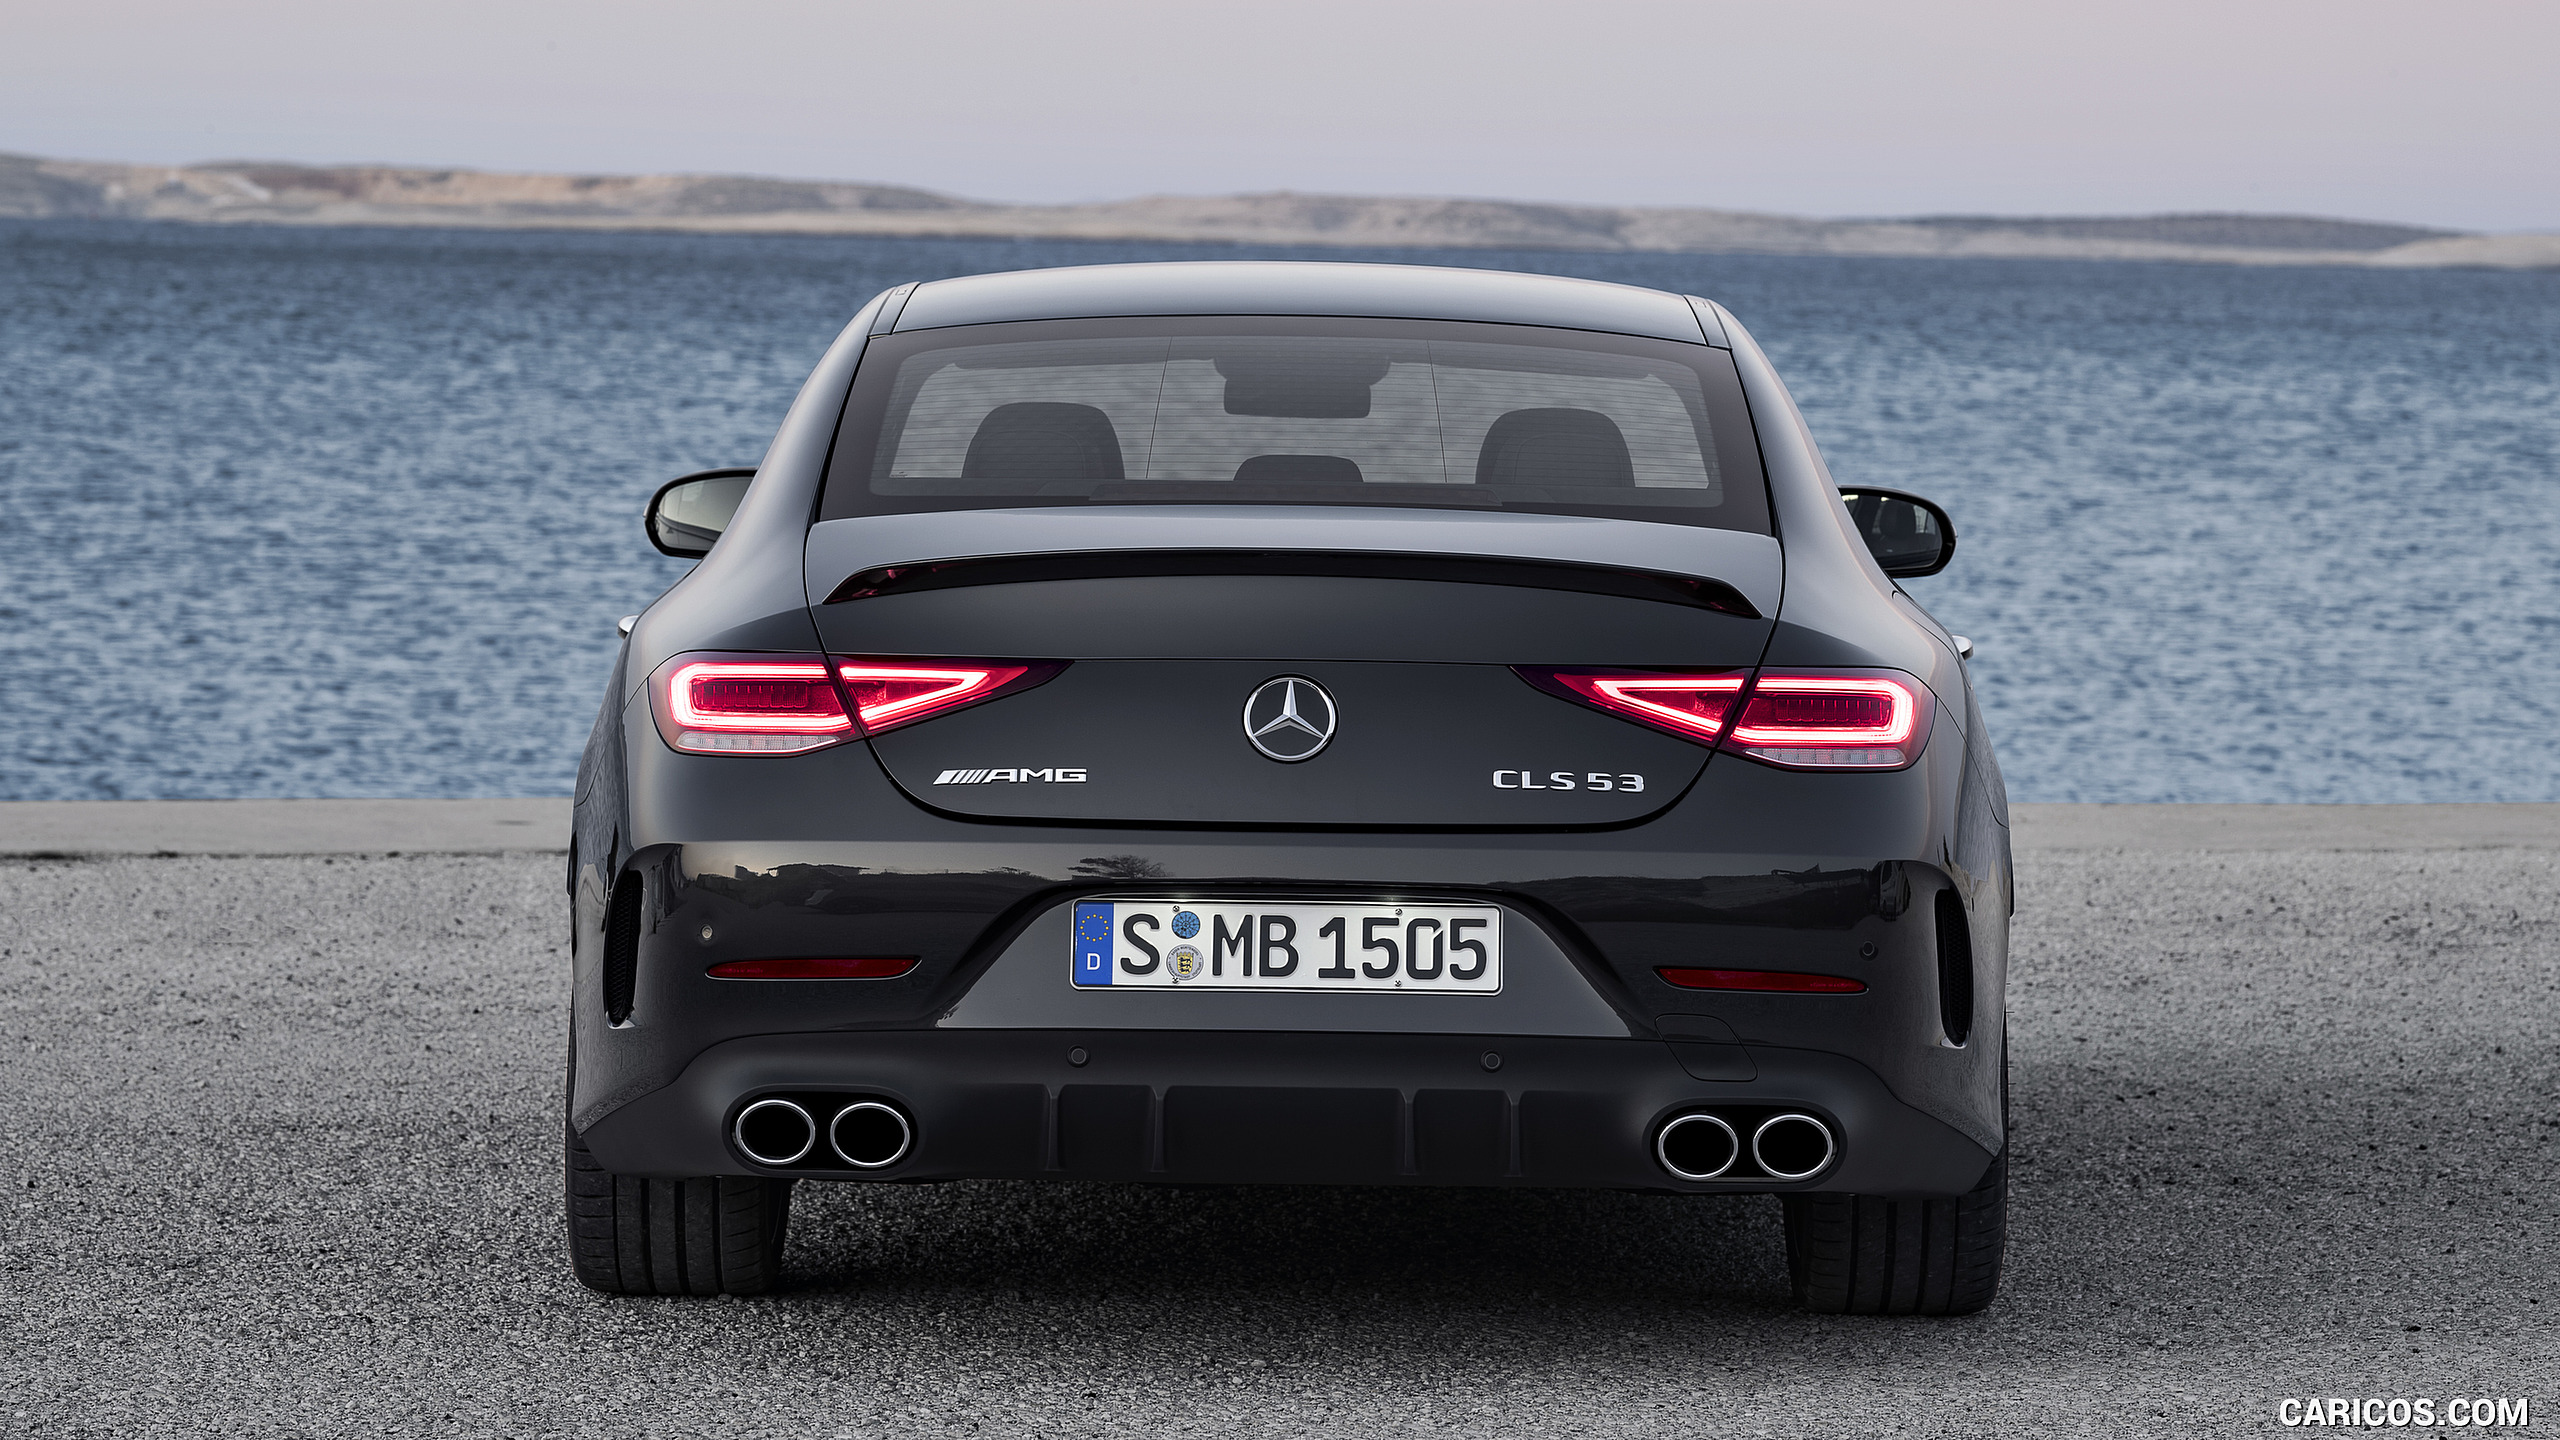 2019 Mercedes-AMG CLS 53 4MATIC+ - Rear, #9 of 84